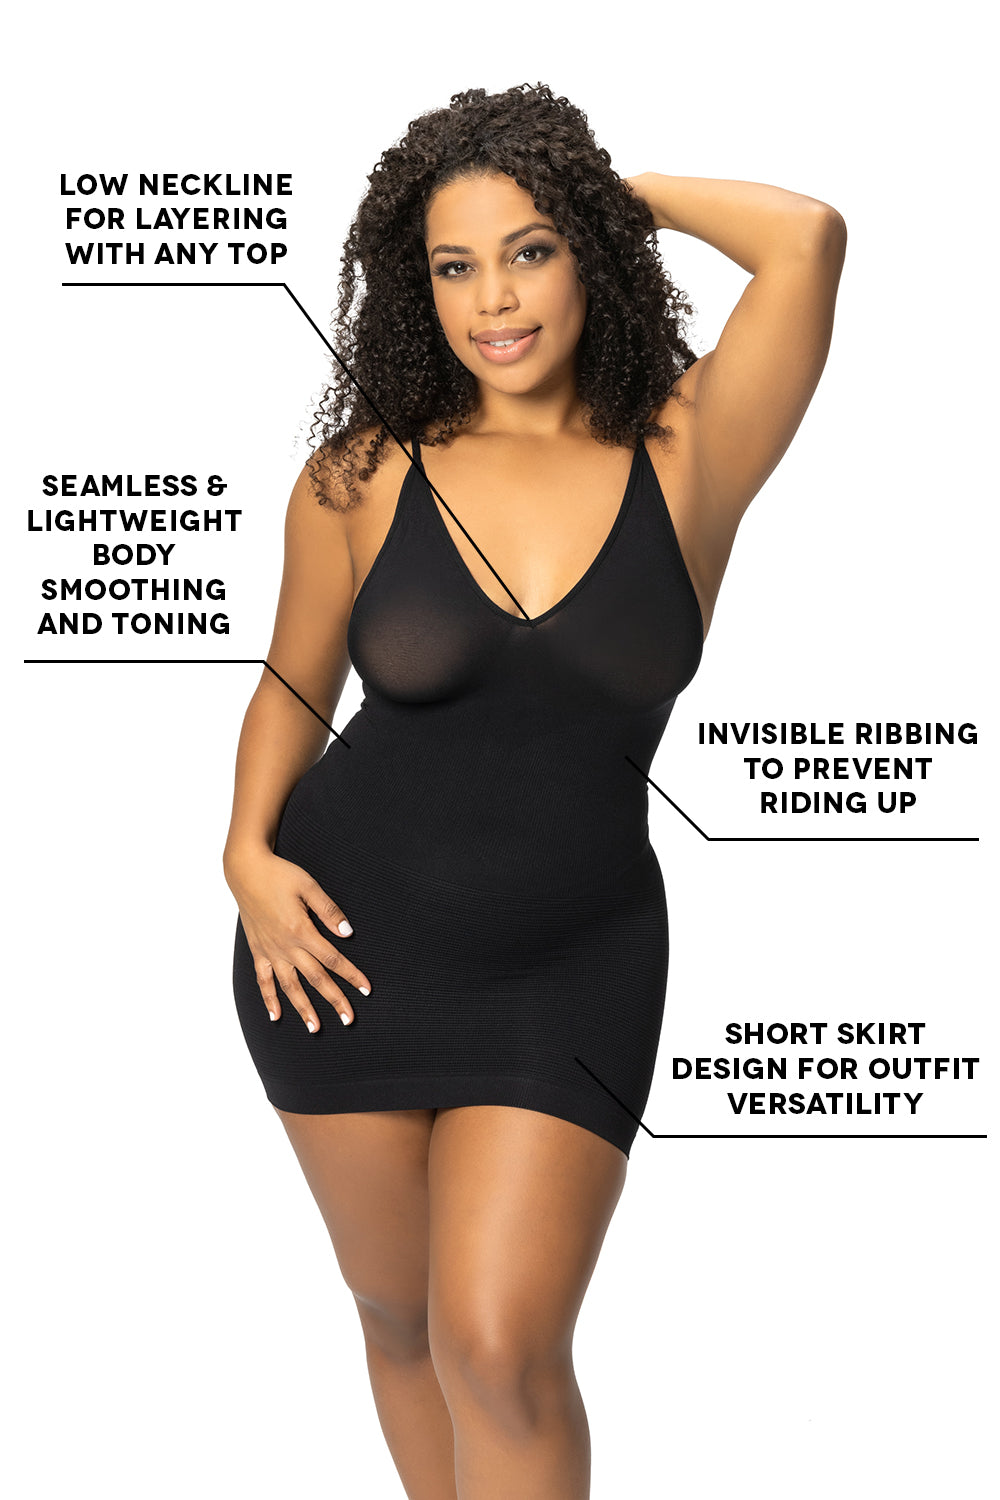 Shapers are just a need with any outfit sorry @Attlady #shapewear #att